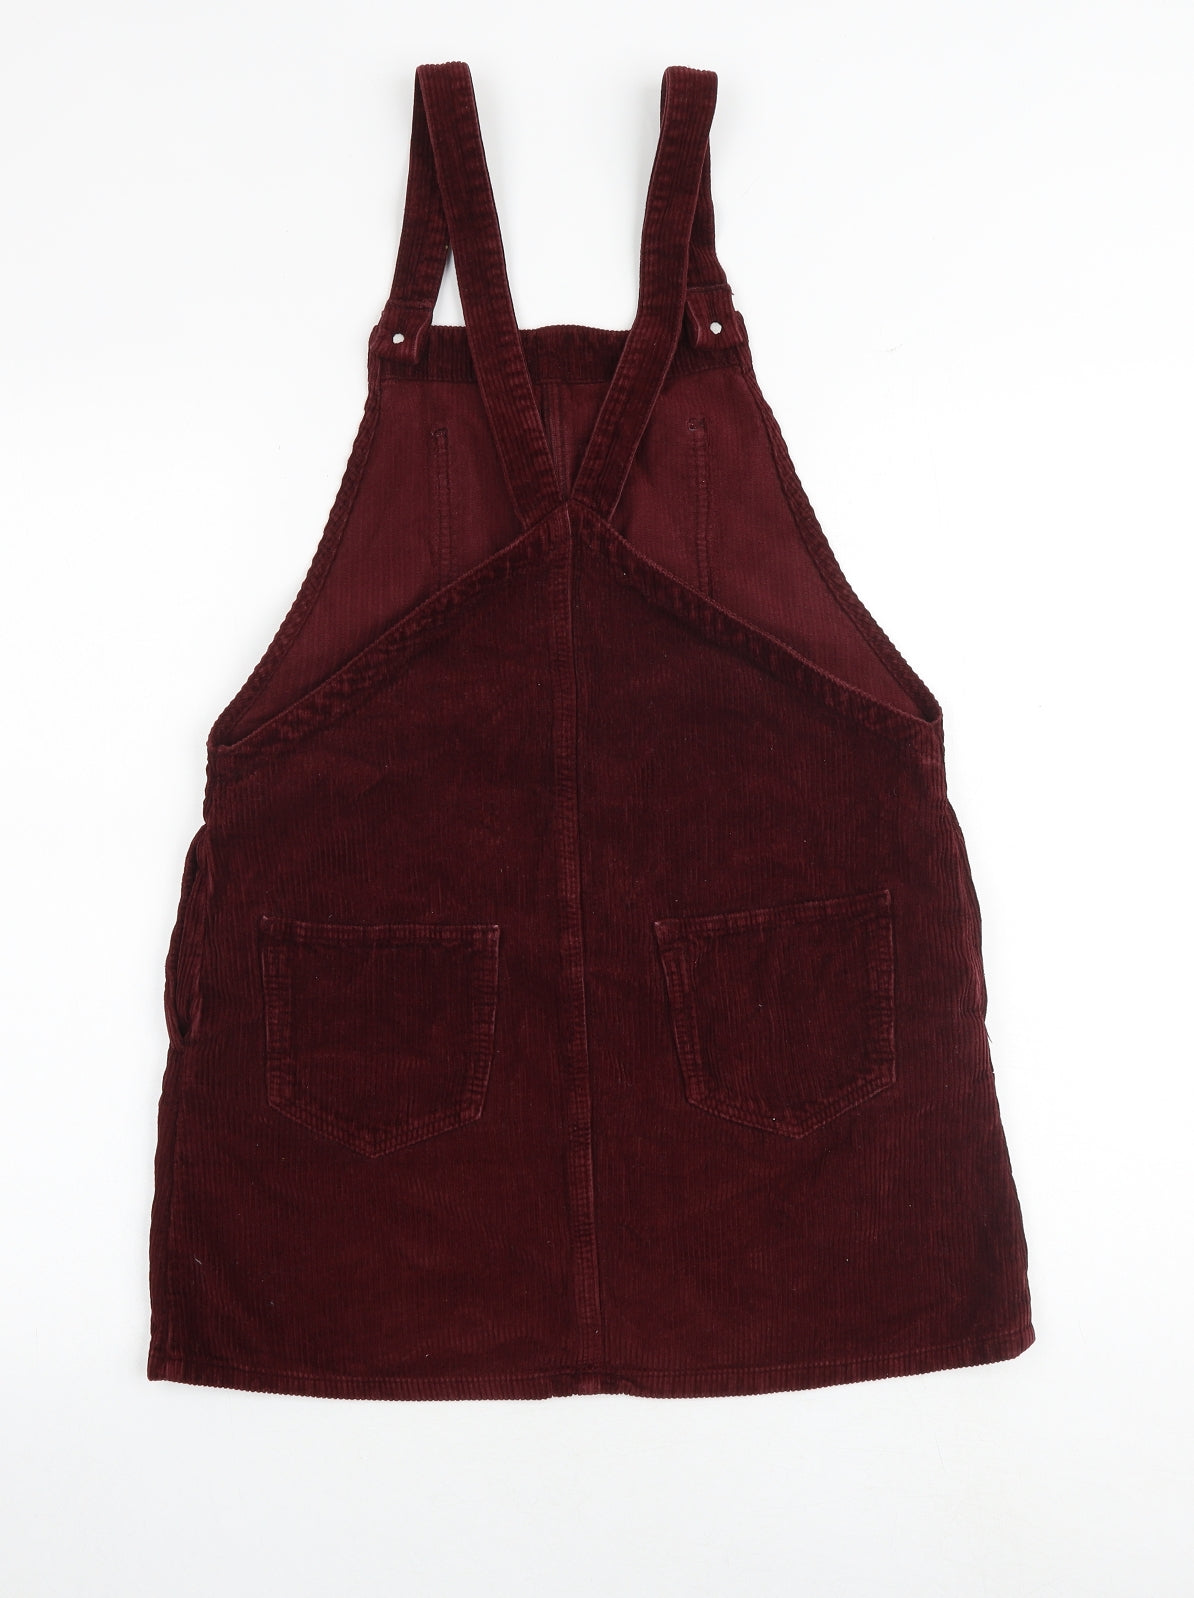 Topshop Womens Red 100% Cotton Pinafore/Dungaree Dress Size 10 Square Neck Buckle